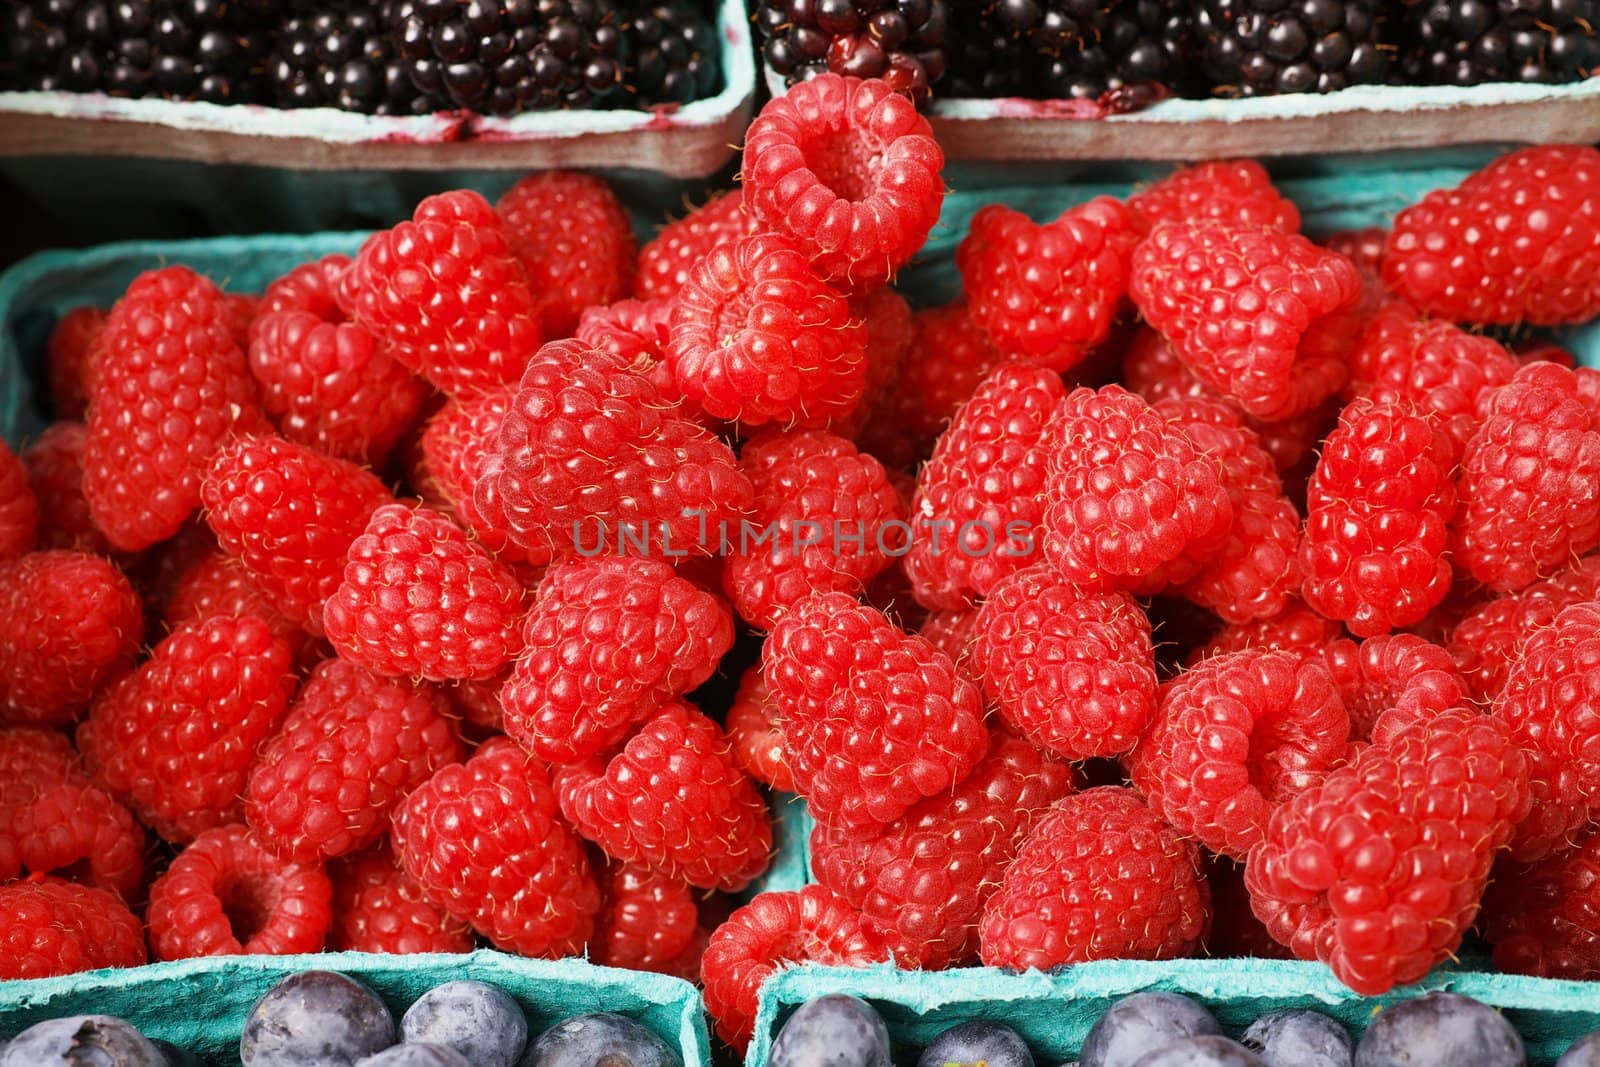 Blue container of a pile of Red Juicy Raspberries at the farmers market